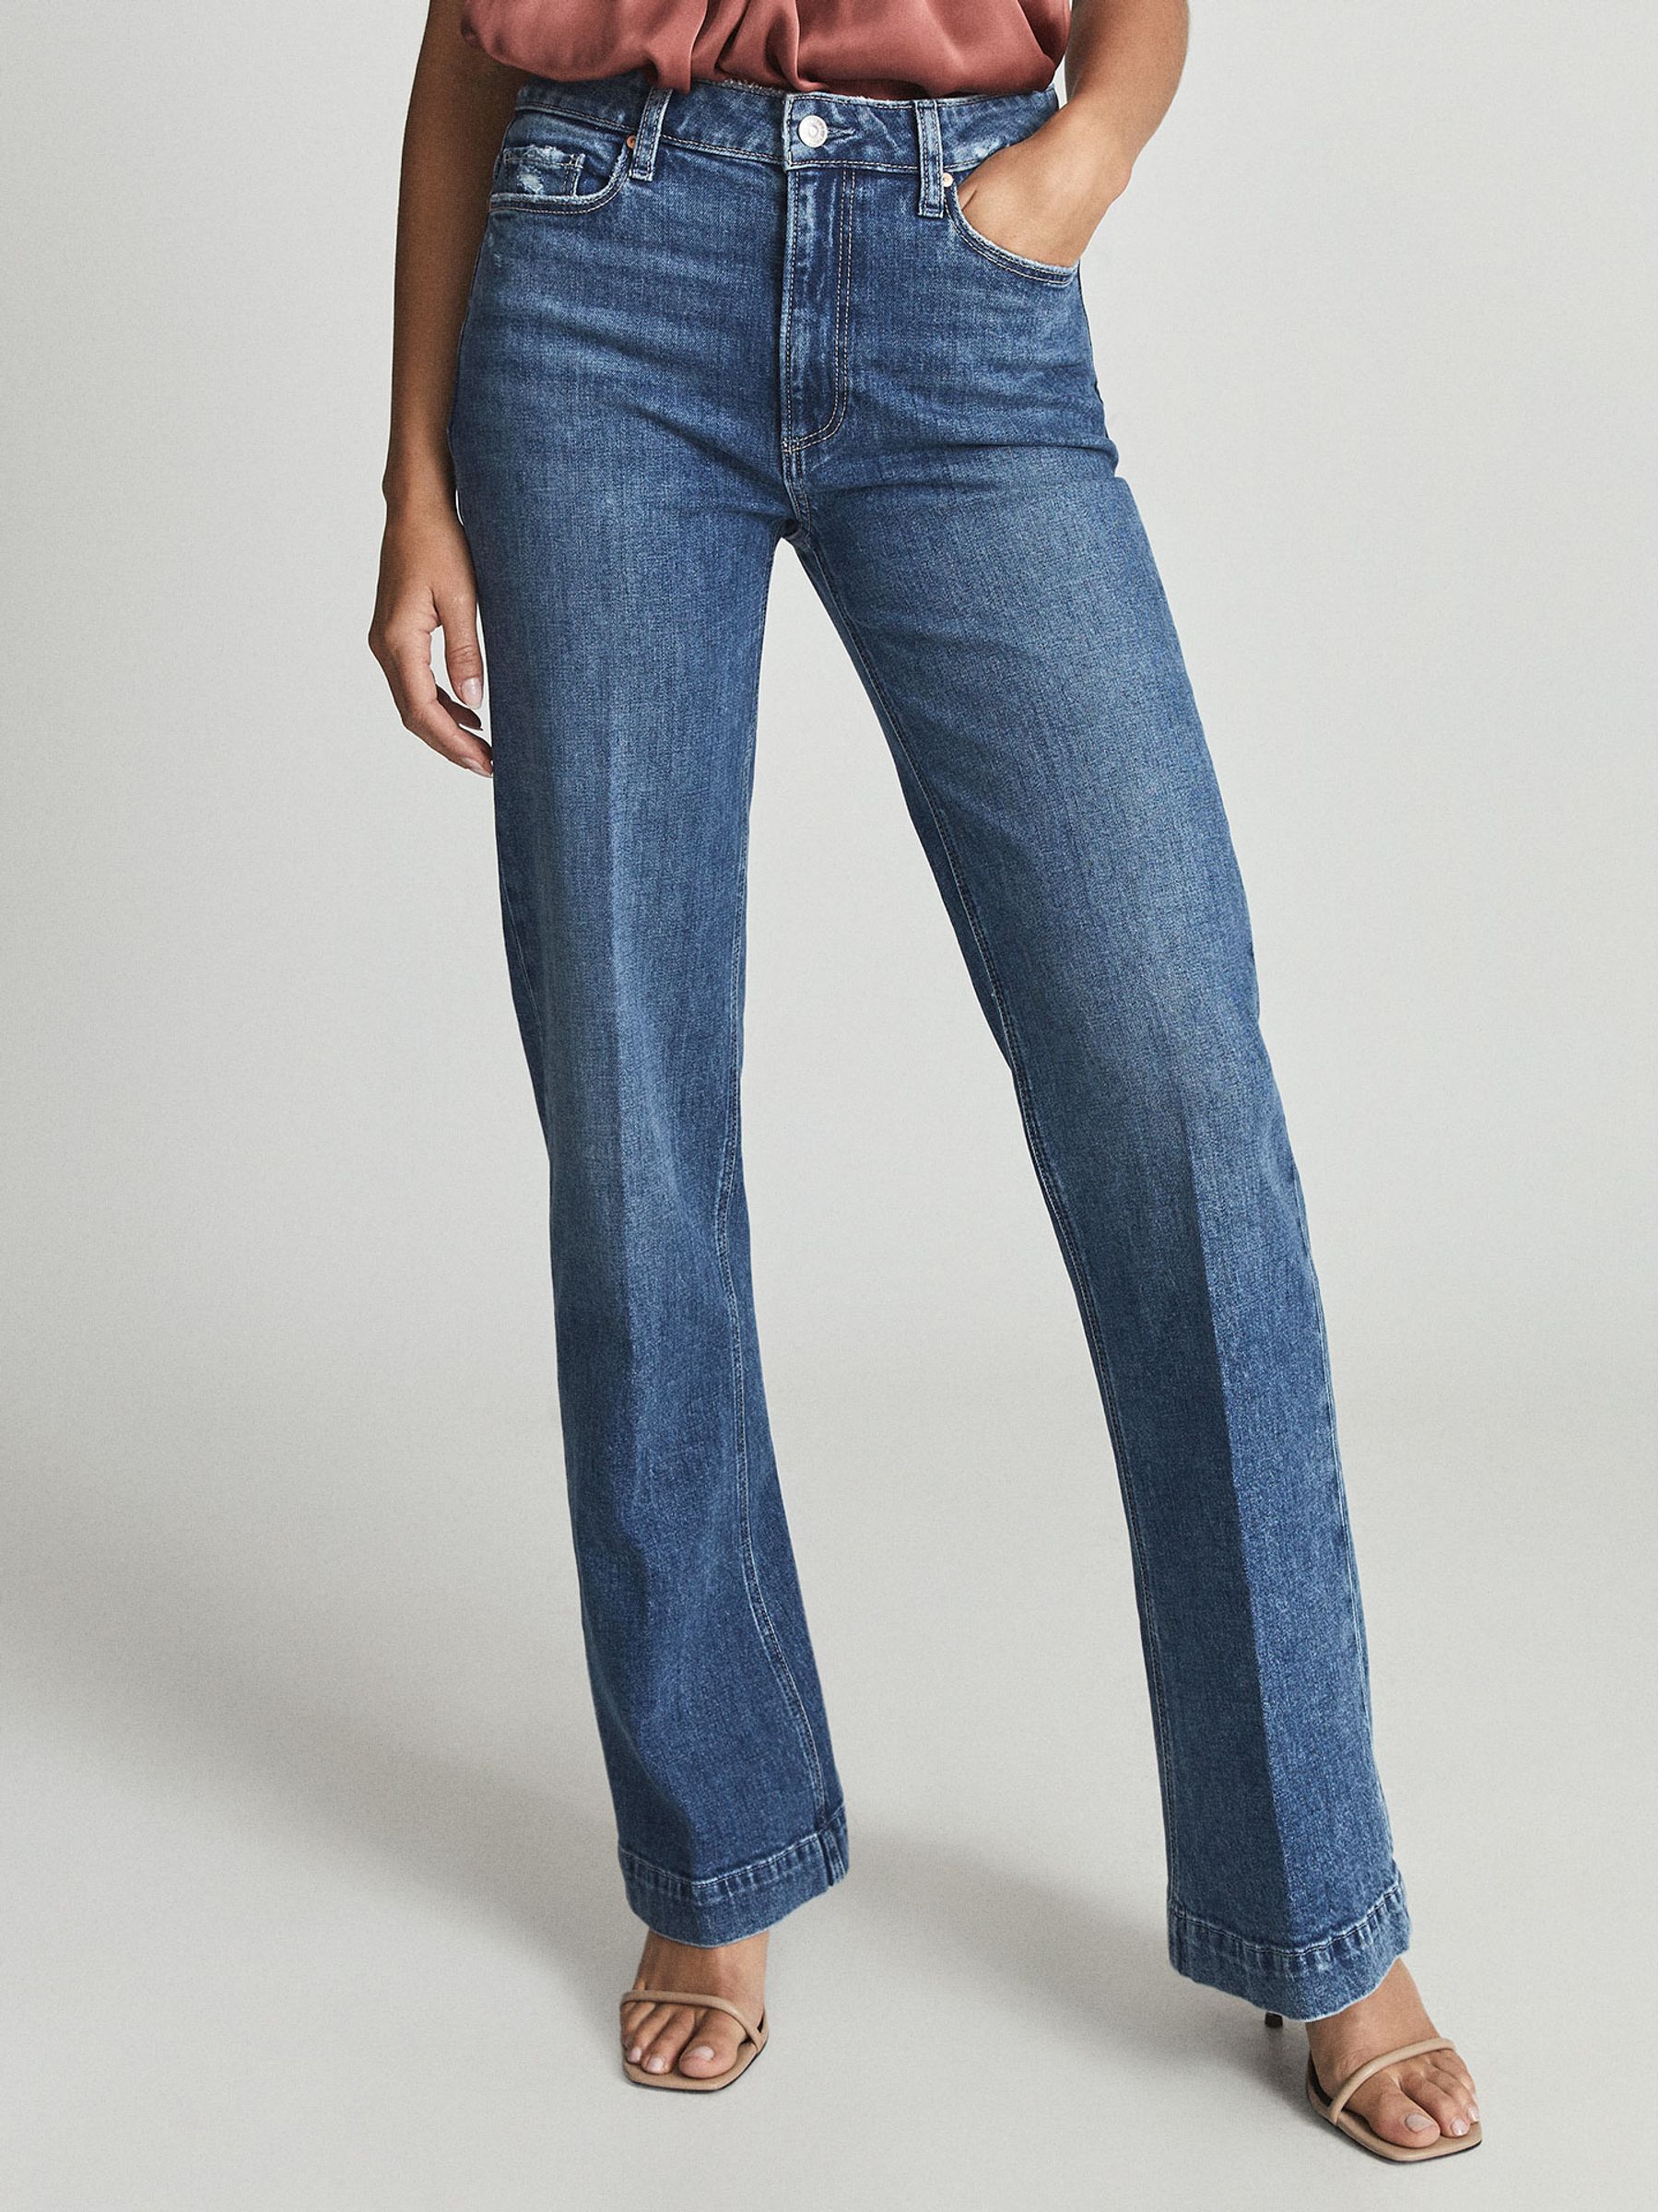 Reiss Leenah Paige High Rise Flared Jeans - REISS